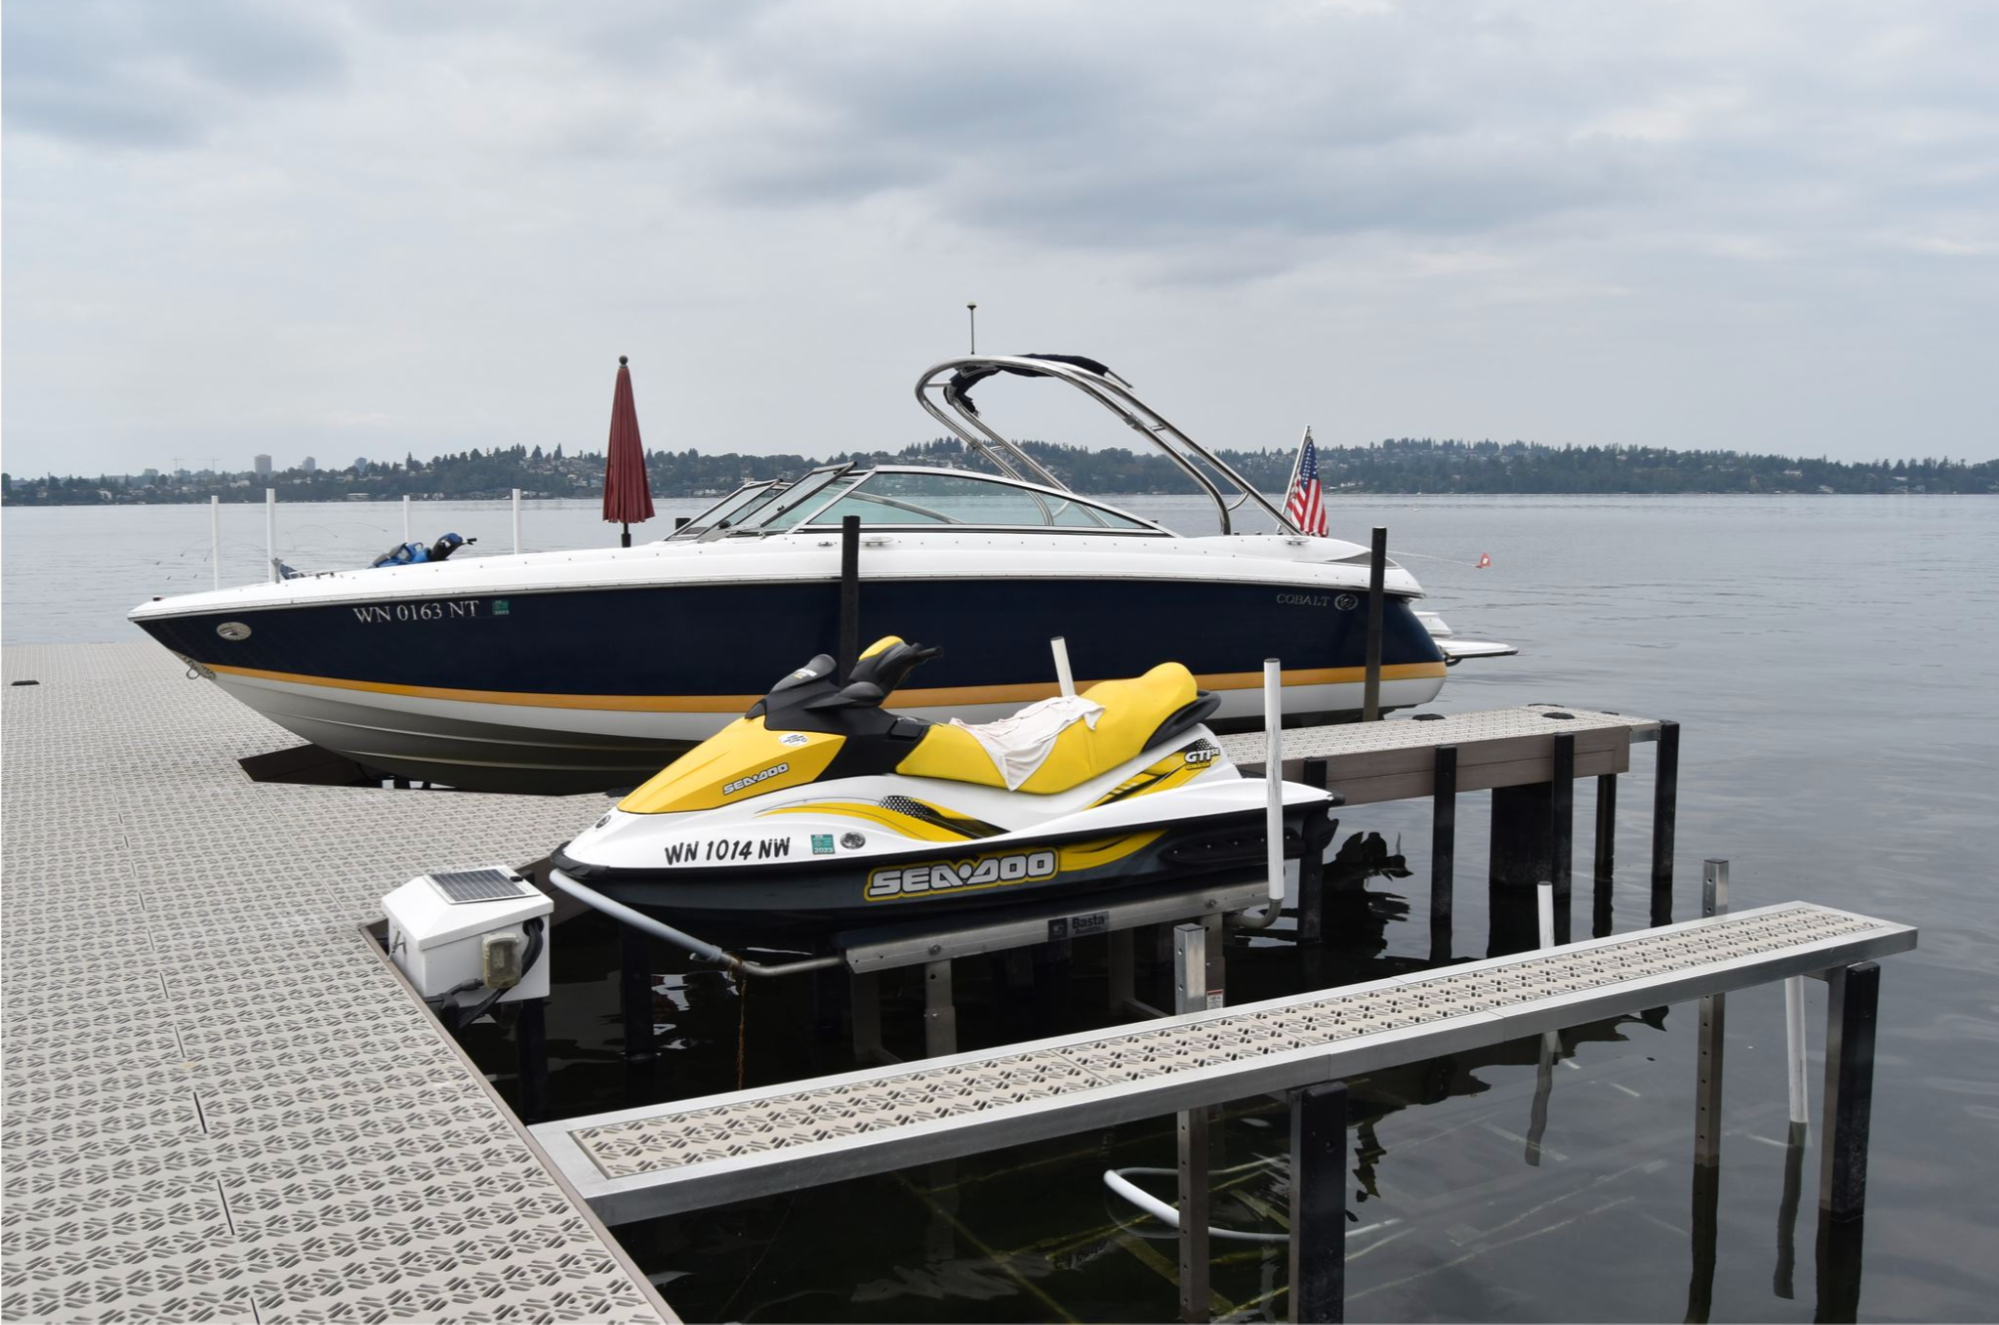 A black and white boat and a yellow jet ski are docked and on lifts to raise them from the water.